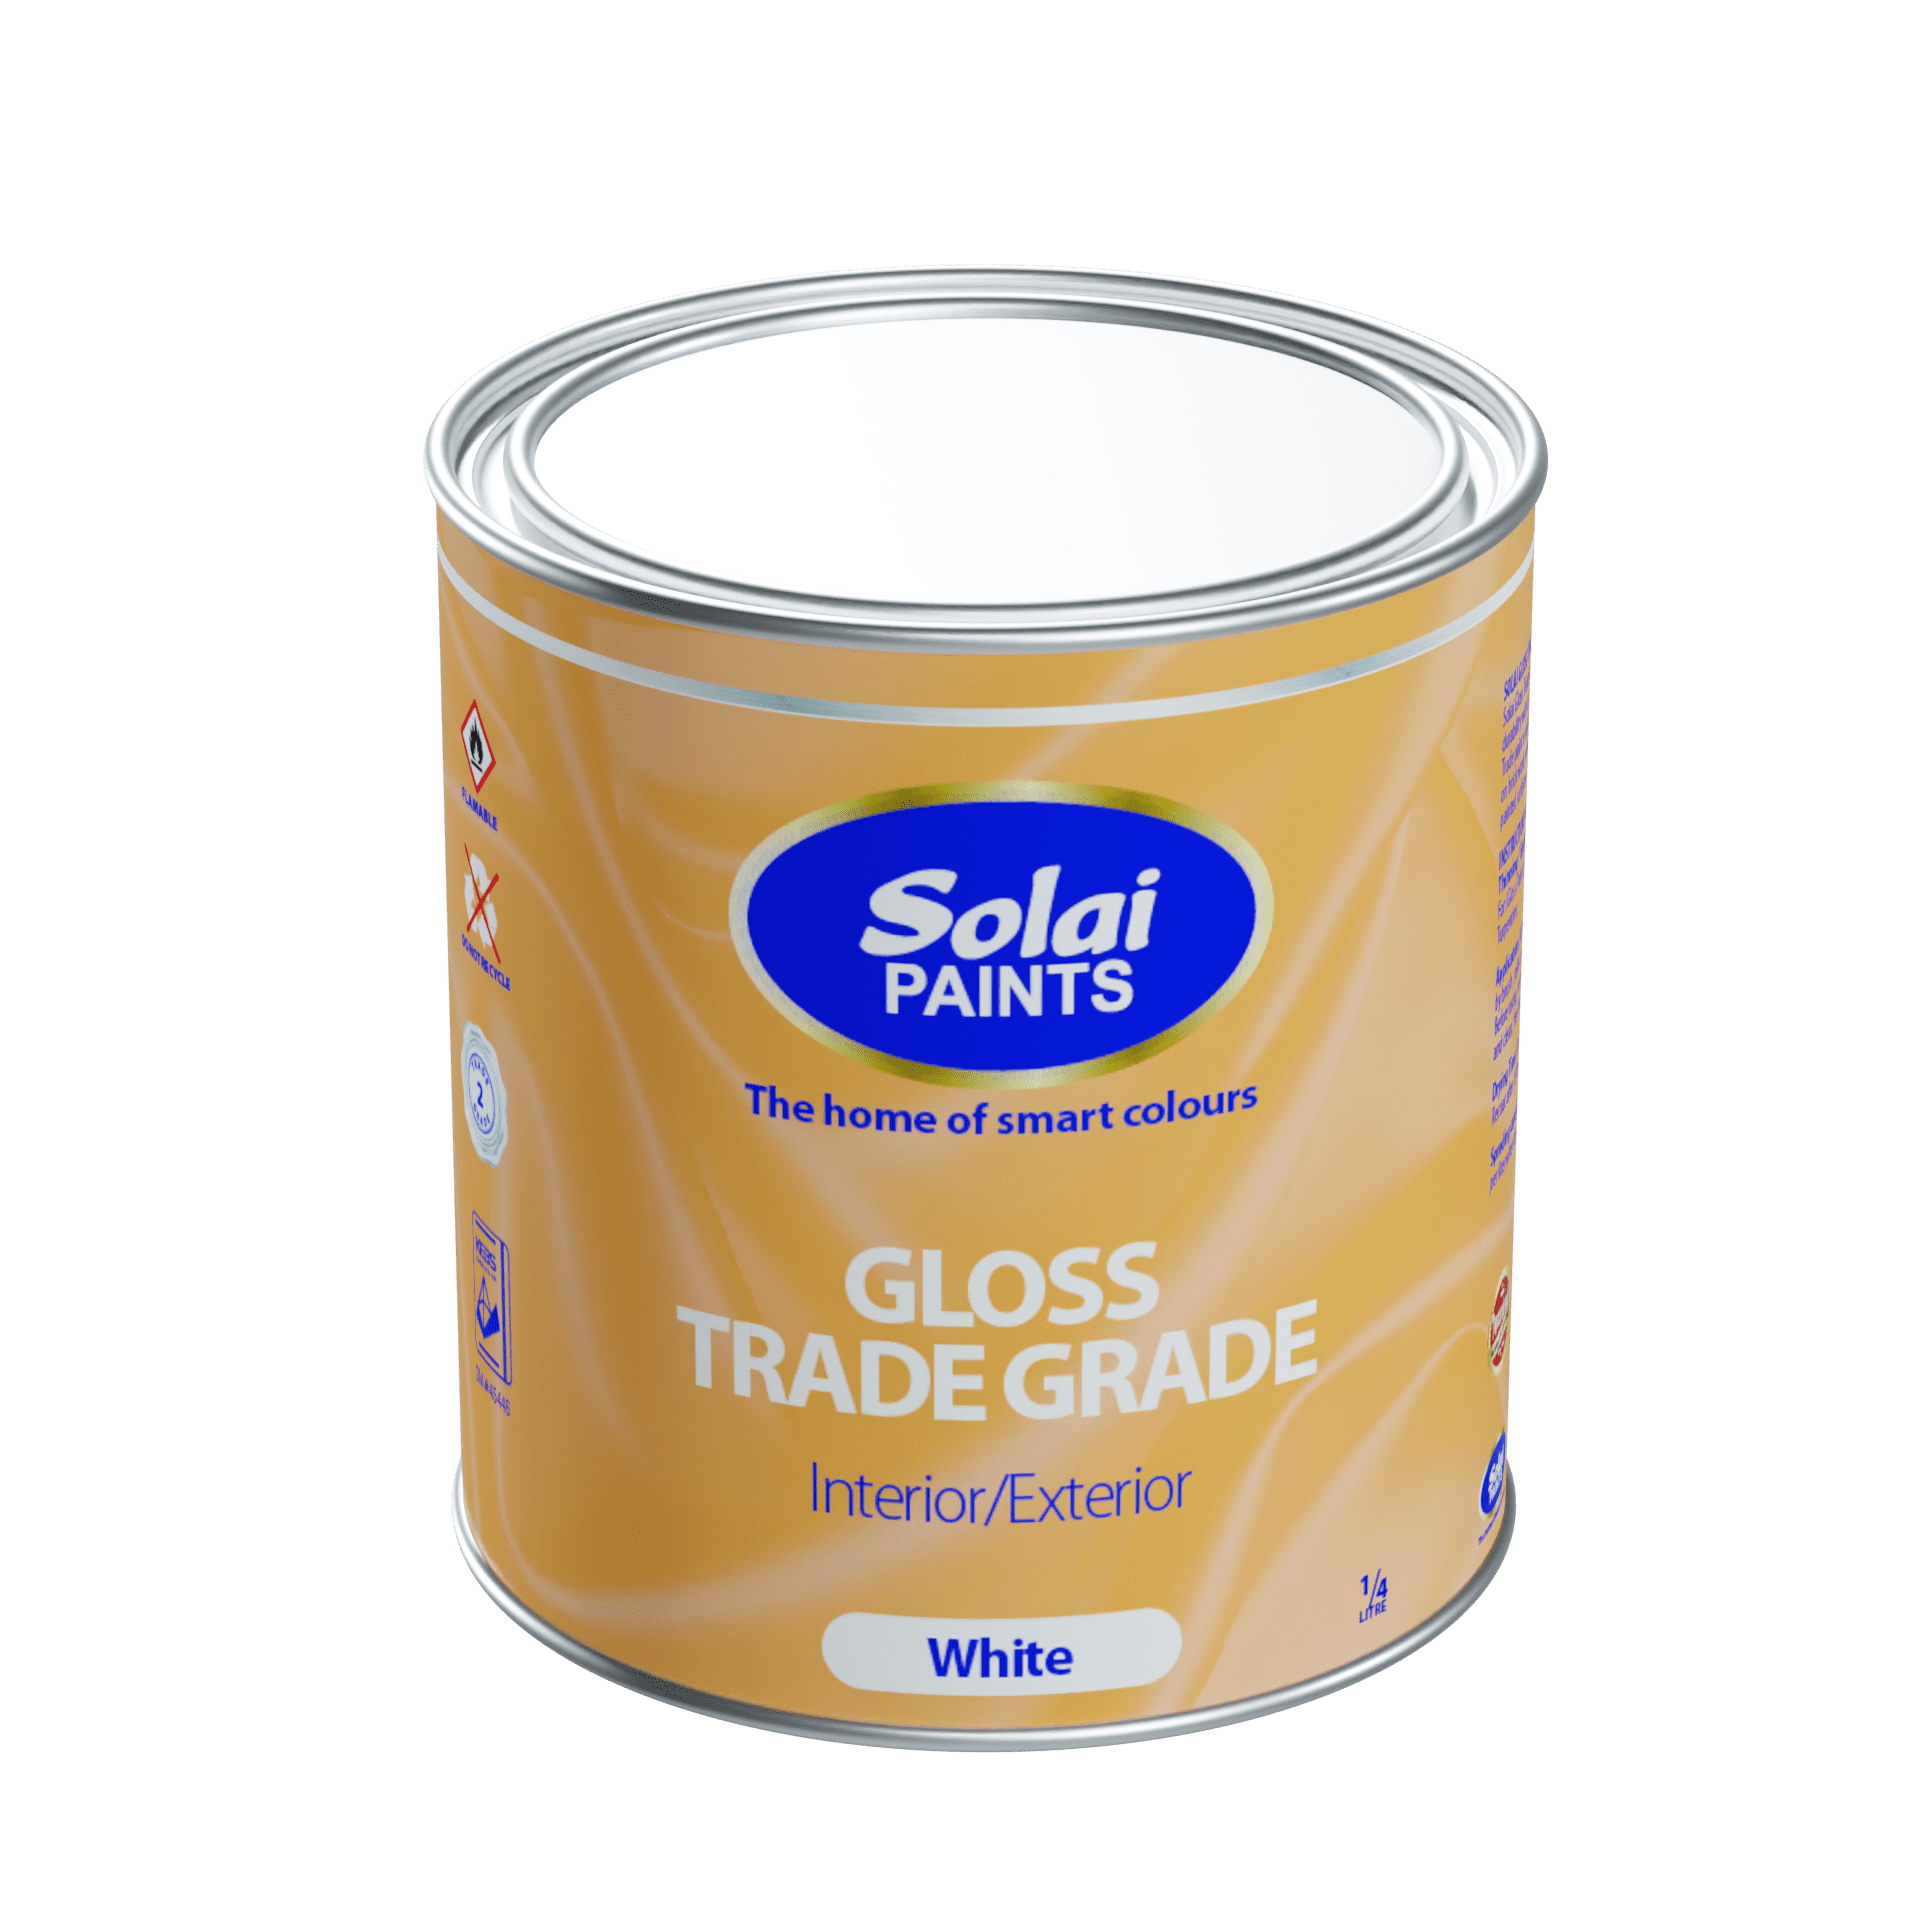 Second grade Gloss Paint, Most affordable Gloss Paint in Kenya, Shiny Paint, Lead Free Paint.